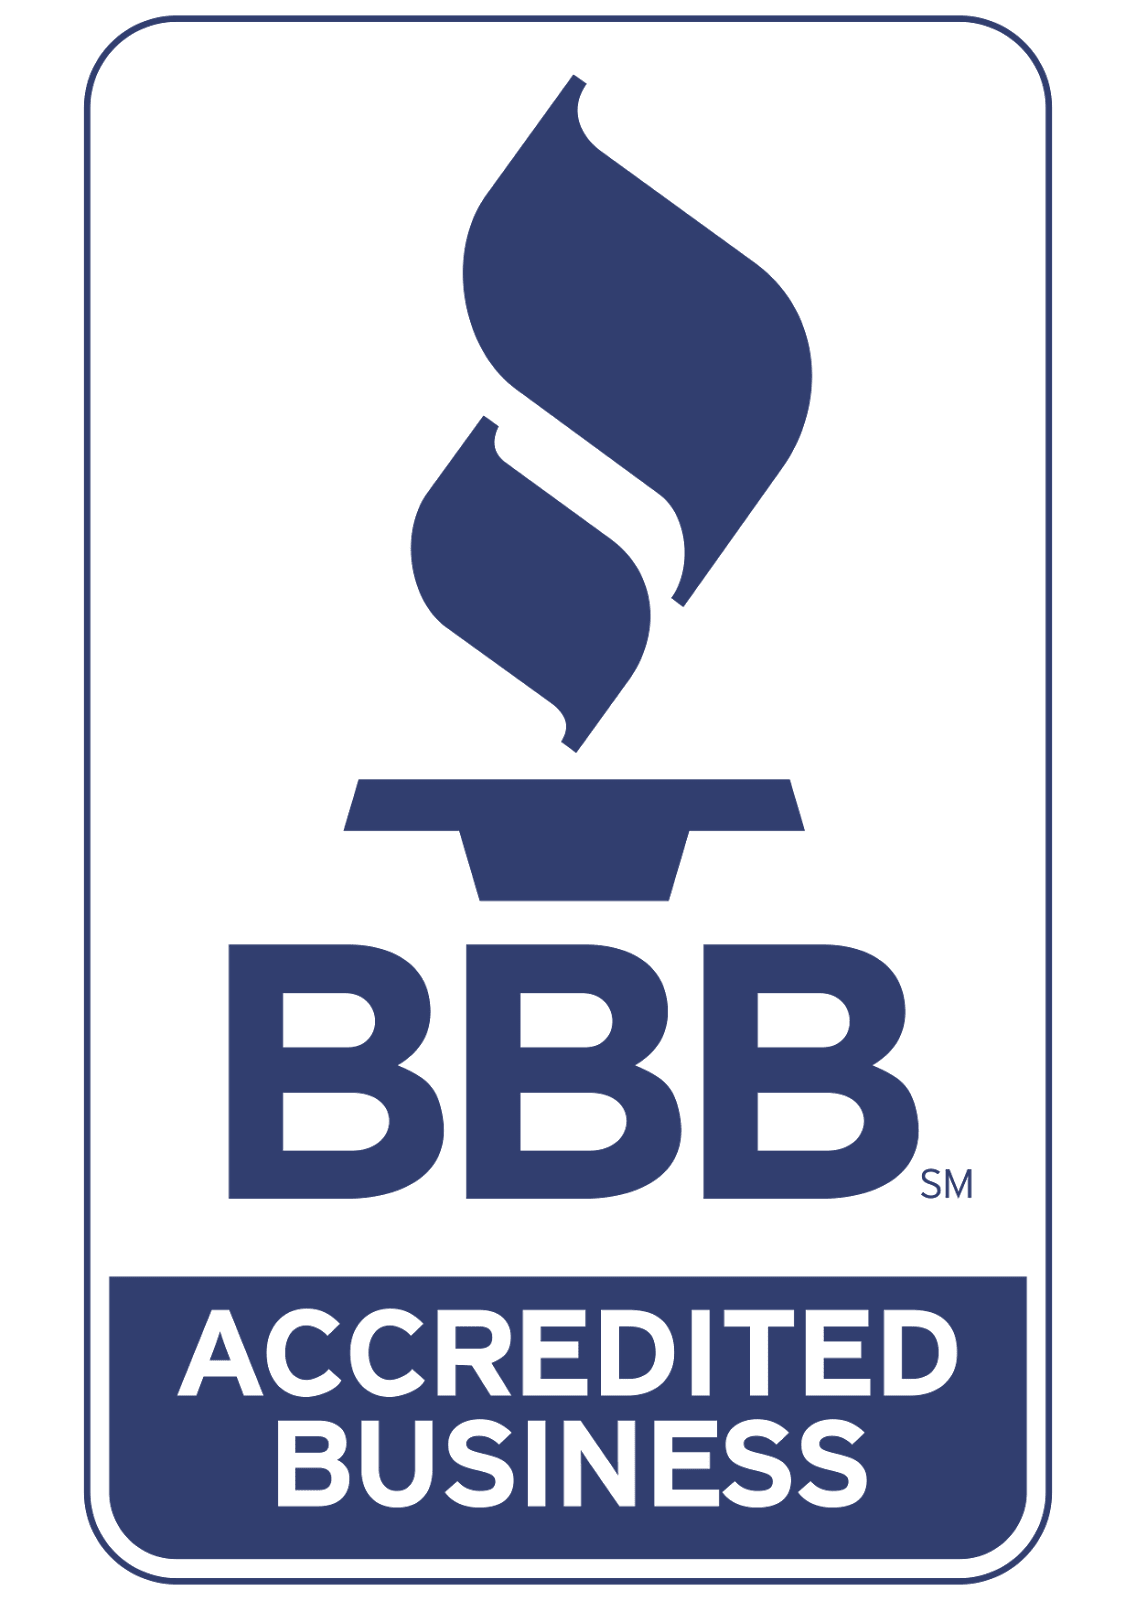 BETTER BUSINESS BUREAU
OF SOUTH CAROLINA.

BBB ACCREDITED BUSINESS:
KENNEDY SEWING AND CUTTING SUPPLY, LLC.